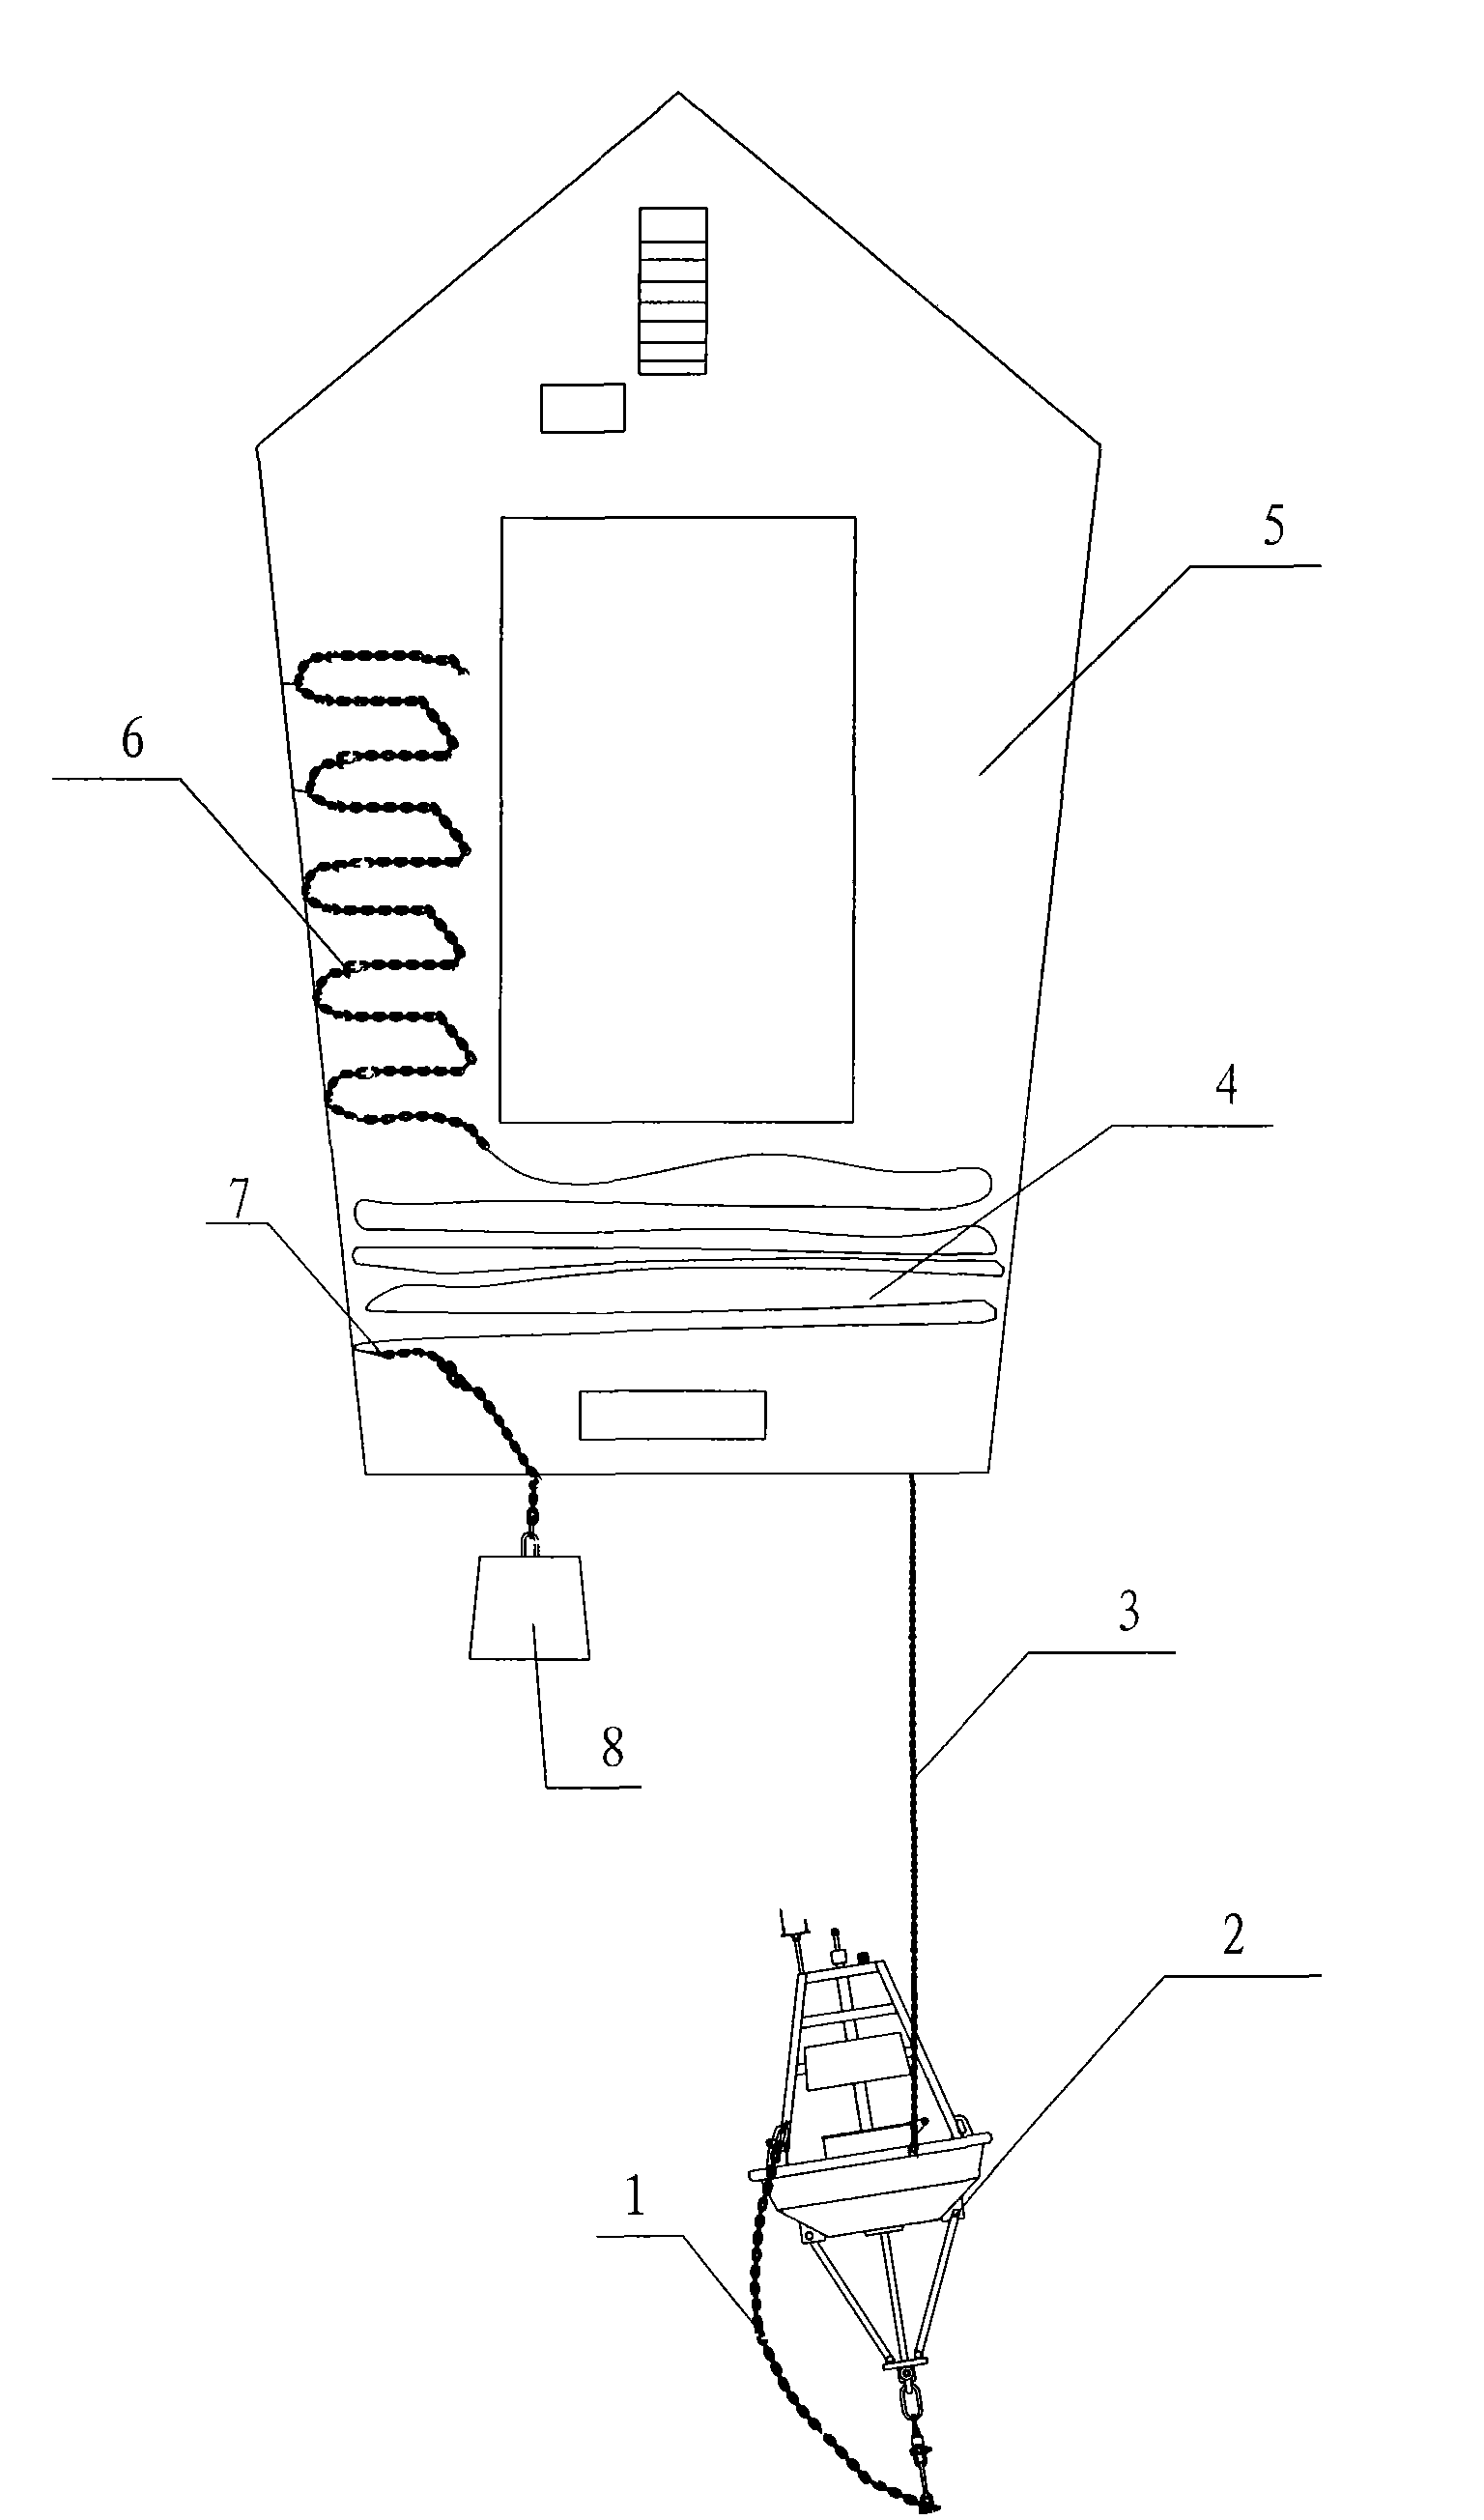 Anchoring ocean observation and research buoy laying system and method based on small-sized ship